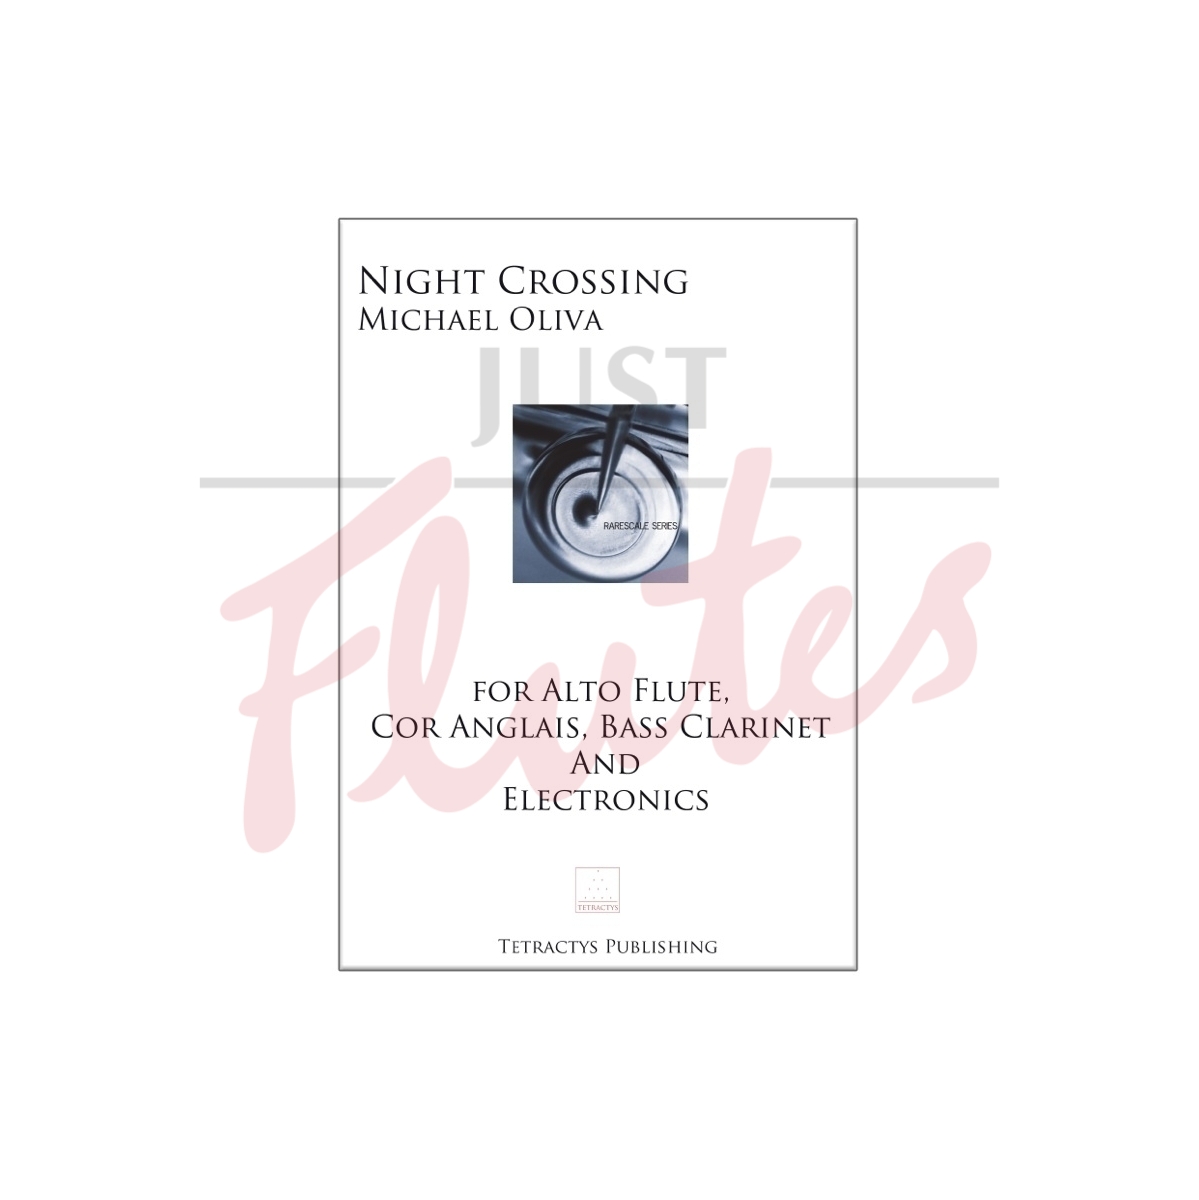 Night Crossing for Alto Flute, Cor Anglais, Bass Clarinet and Electronics